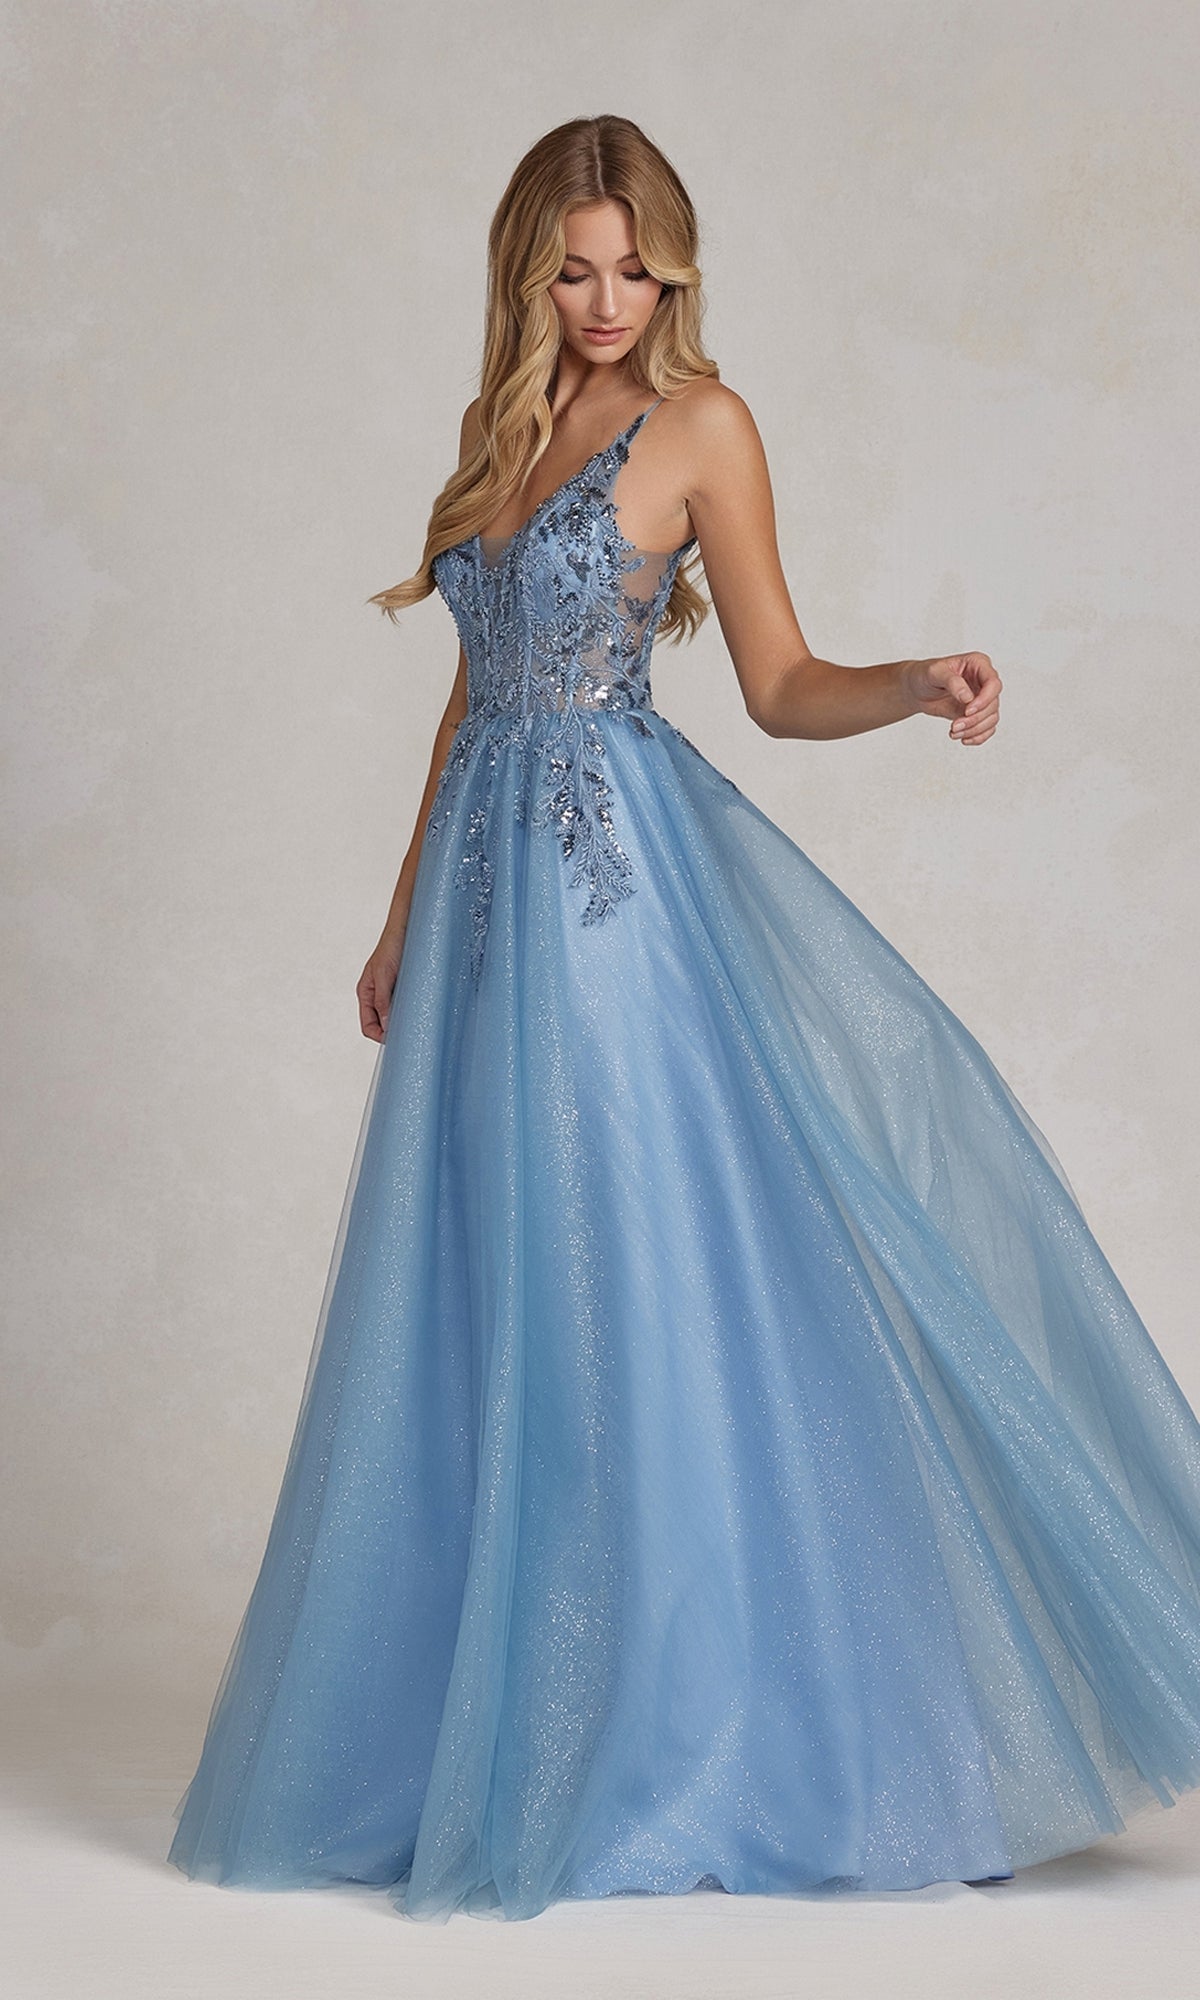 Blush Sky Blue Quinceanera Dresses 2021 Off Shoulder Sequins Beads Flowers  Princess Party Sweet 16 Ball Gown Vestidos De 15 Años From 177,52 € | DHgate